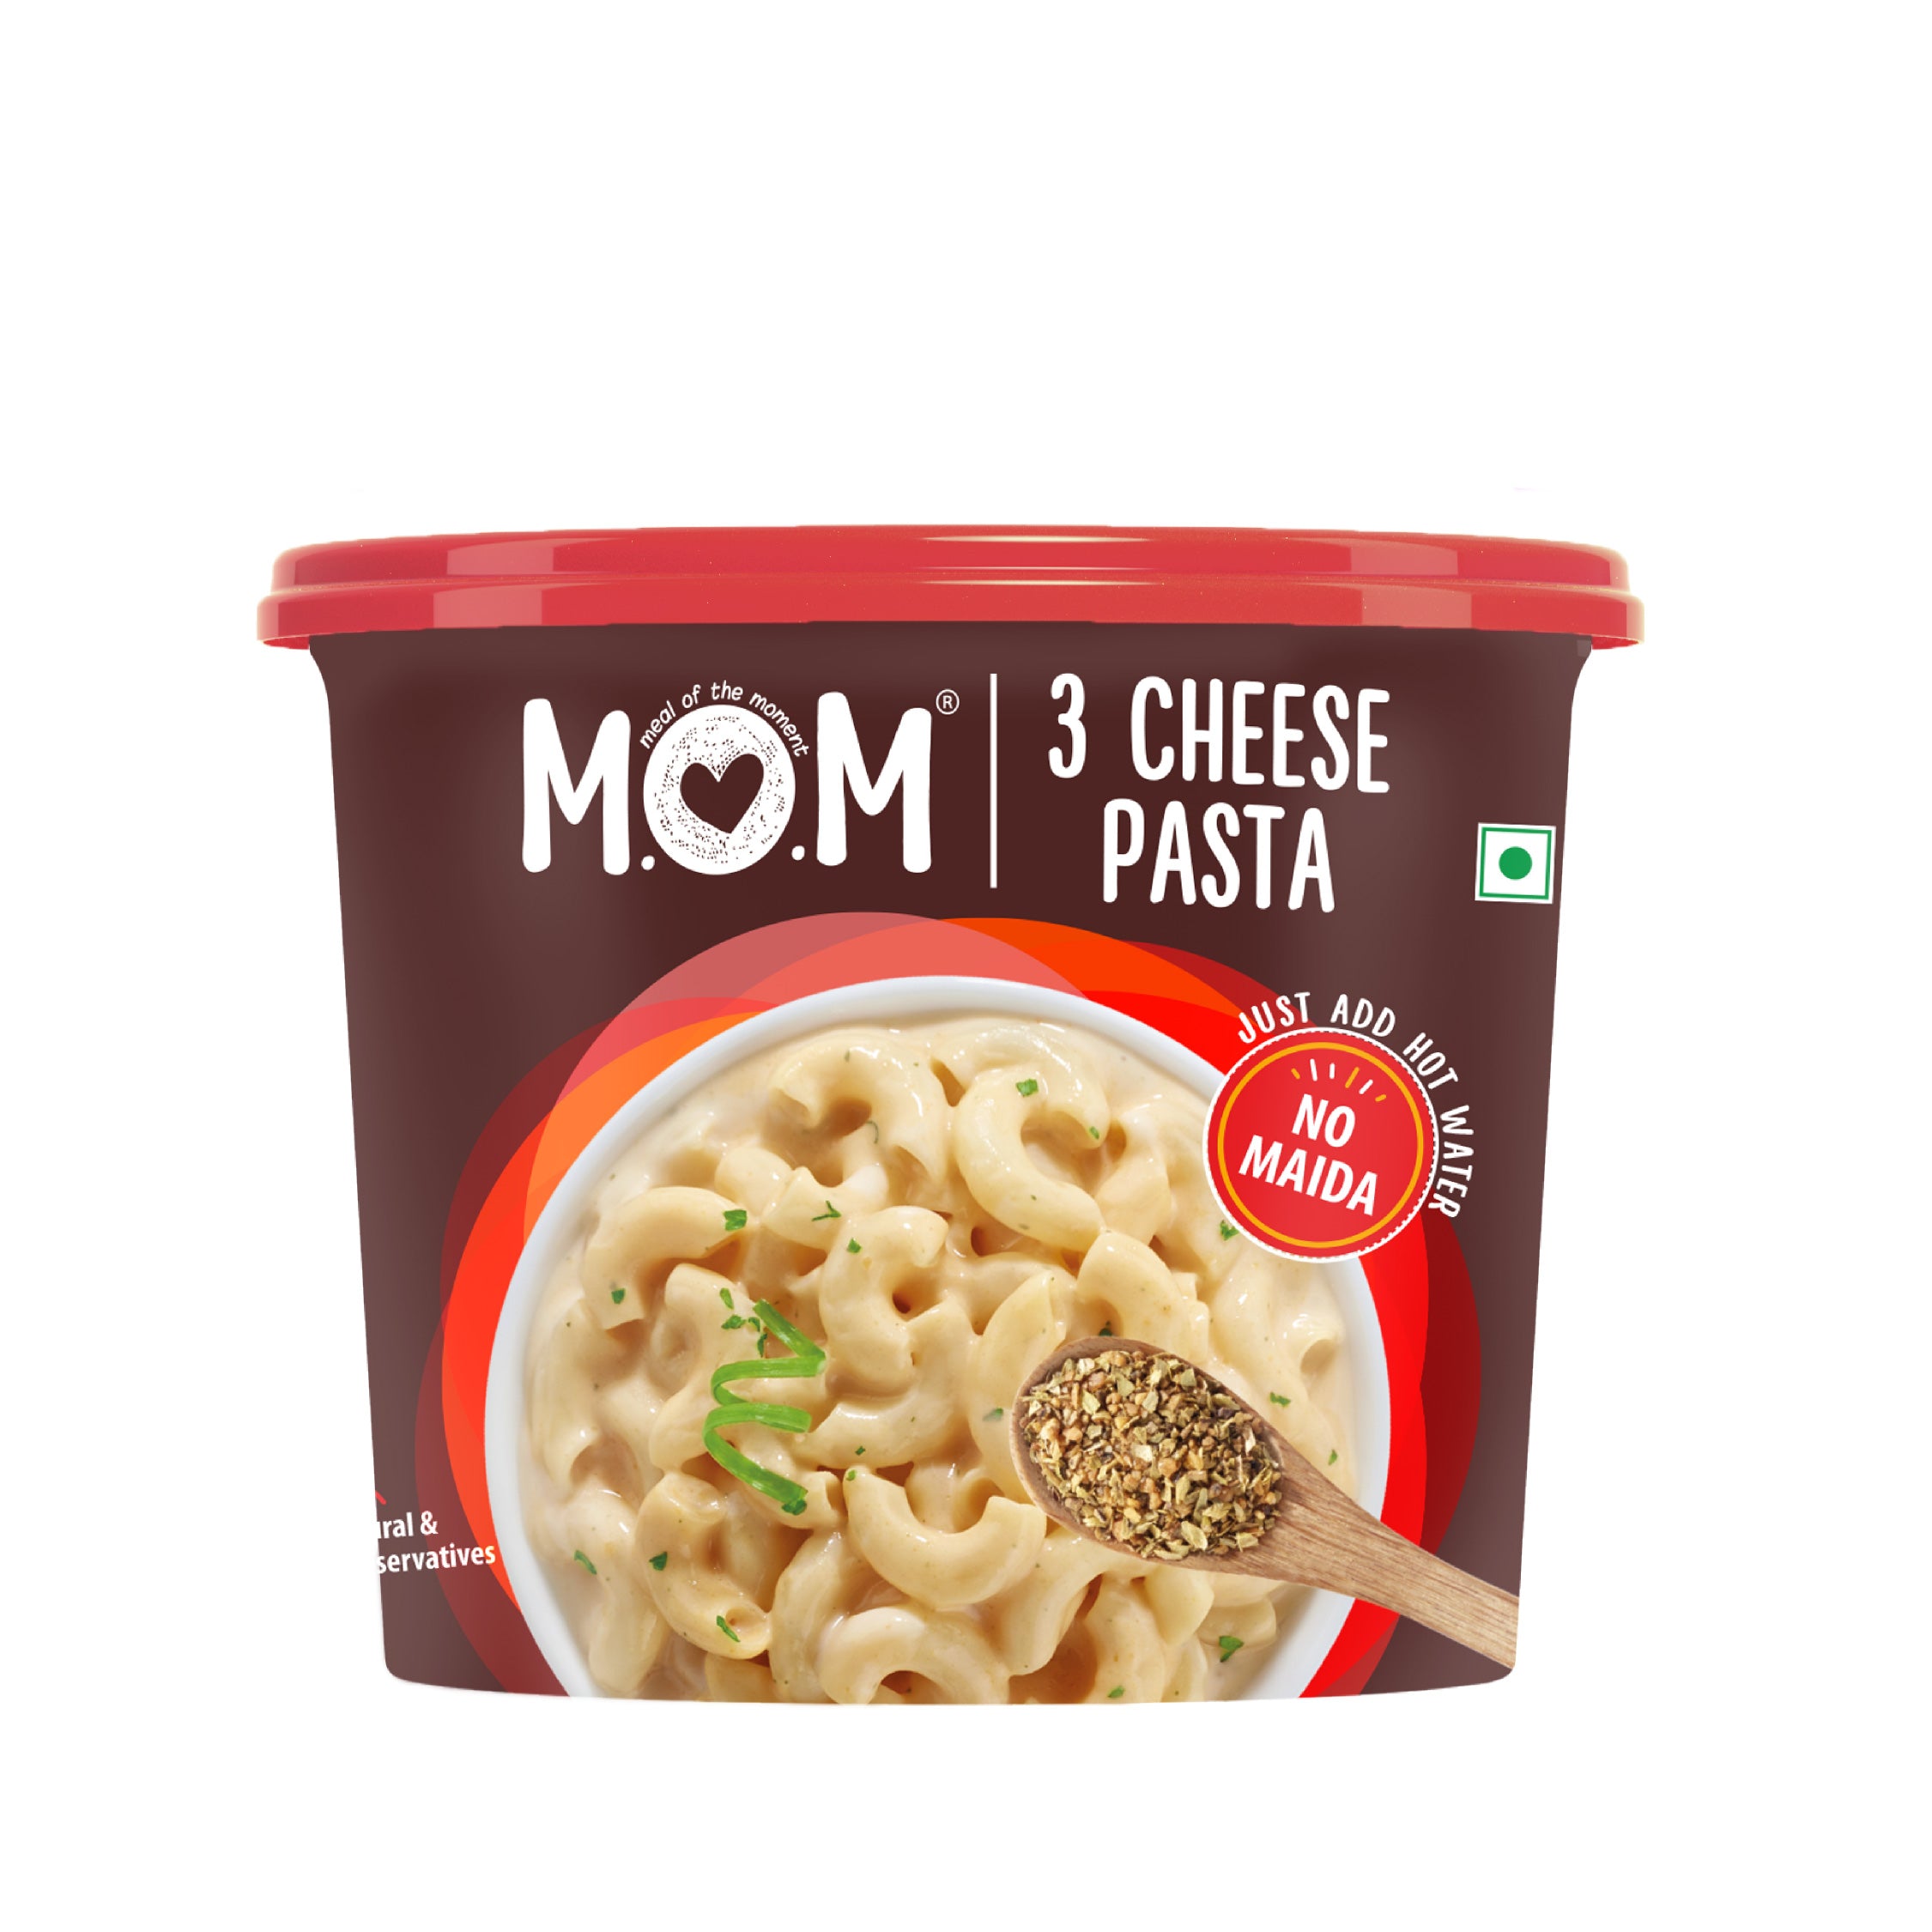 3 Cheese Pasta, 74g - Ready to eat | No added Preservatives | Instant – MOM  Meal of the Moment